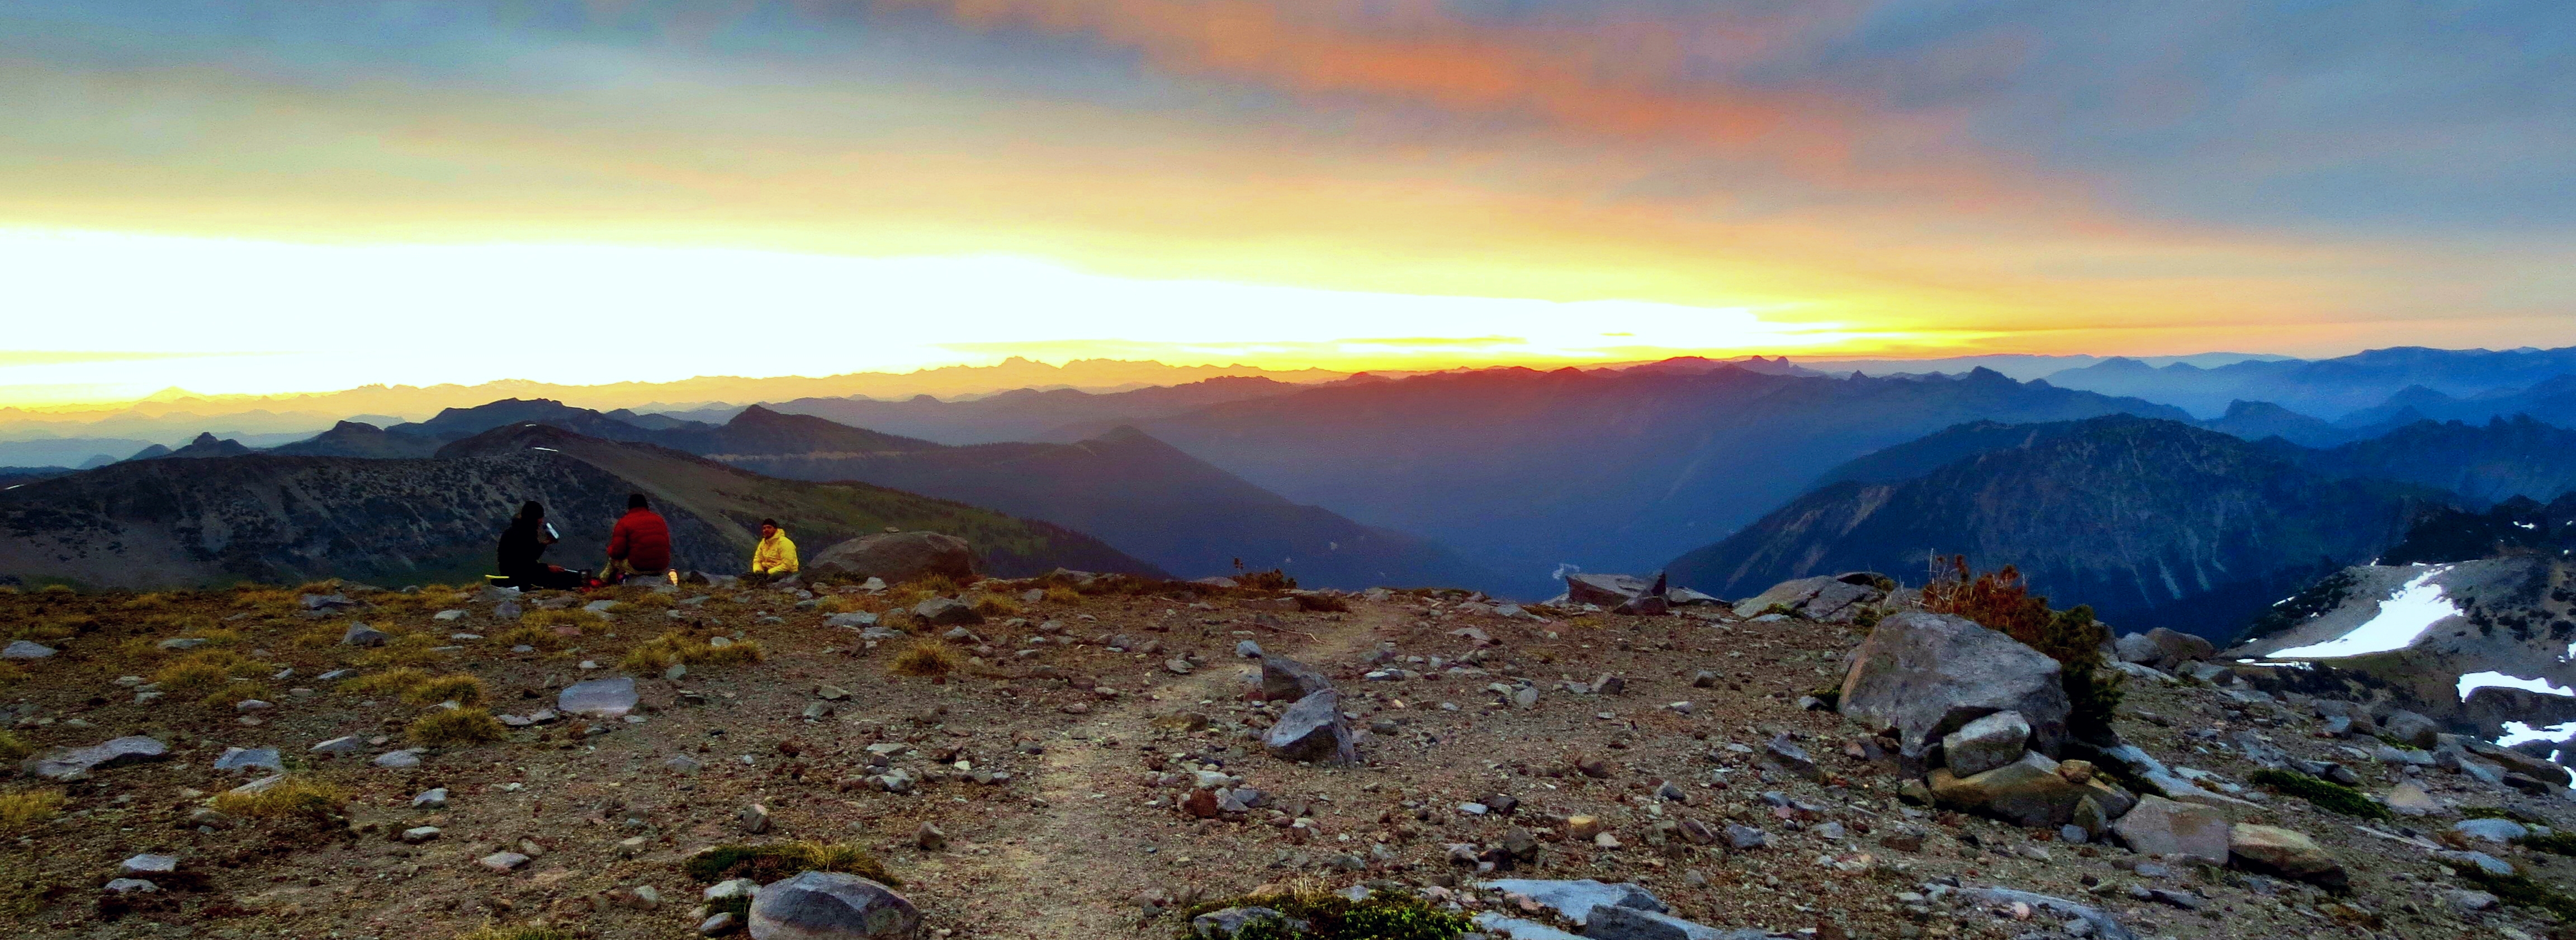 by Eve Rickenbaker: Sunrise on Meany Crest on June 21st after a climb up Little Tahoma, the day before.